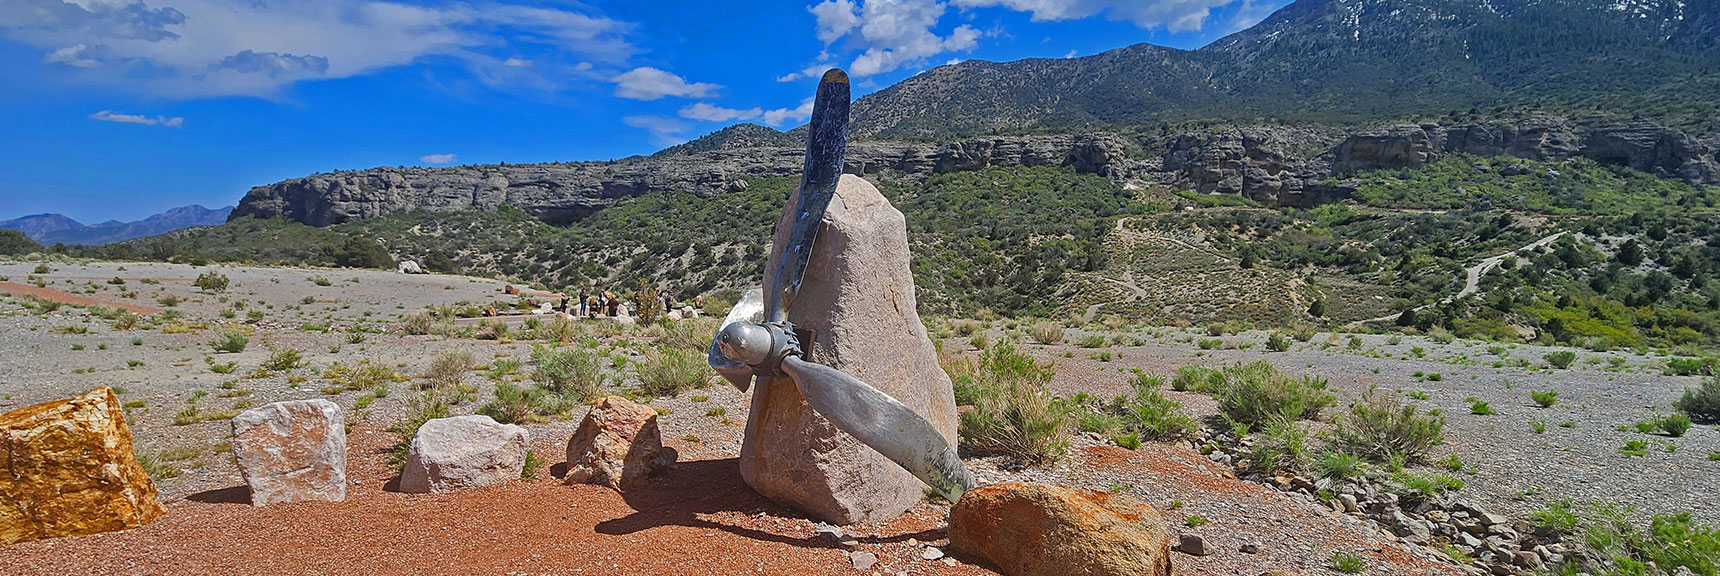 Propeller Now Displayed as Part of Memorial at Spring Mts. Visitor Gateway | Escarpment Trail | Mt Charleston Wilderness | Spring Mountains, Nevada